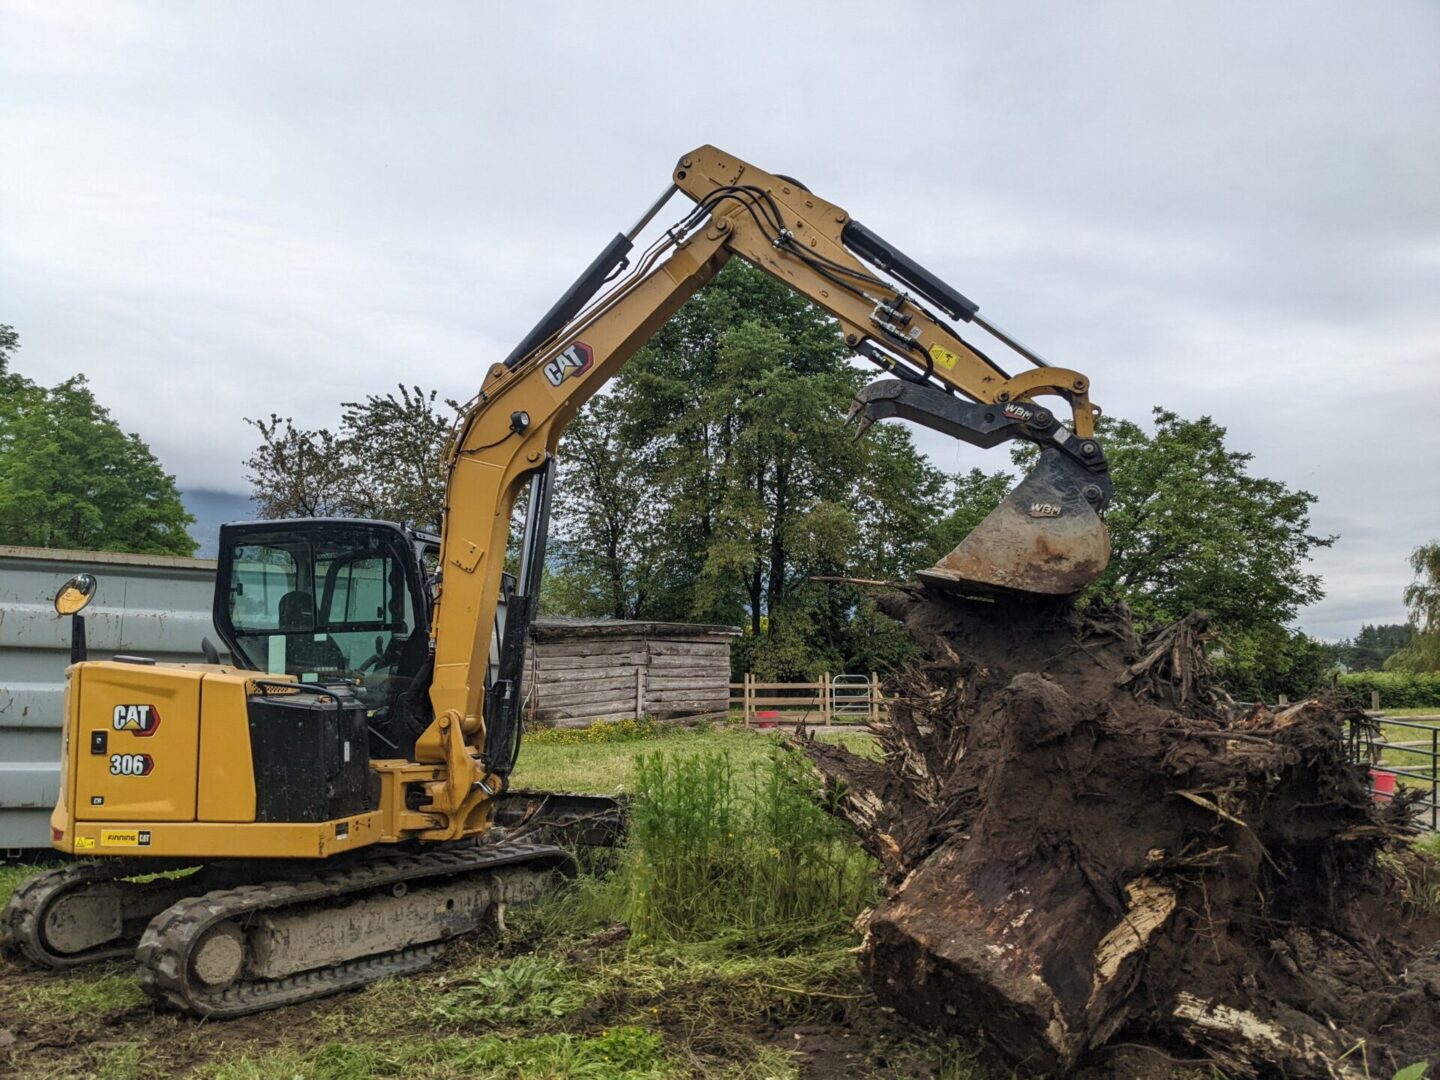 A yellow cat excavator removing a large uprooted tree stump in a grassy field with overcast skies.